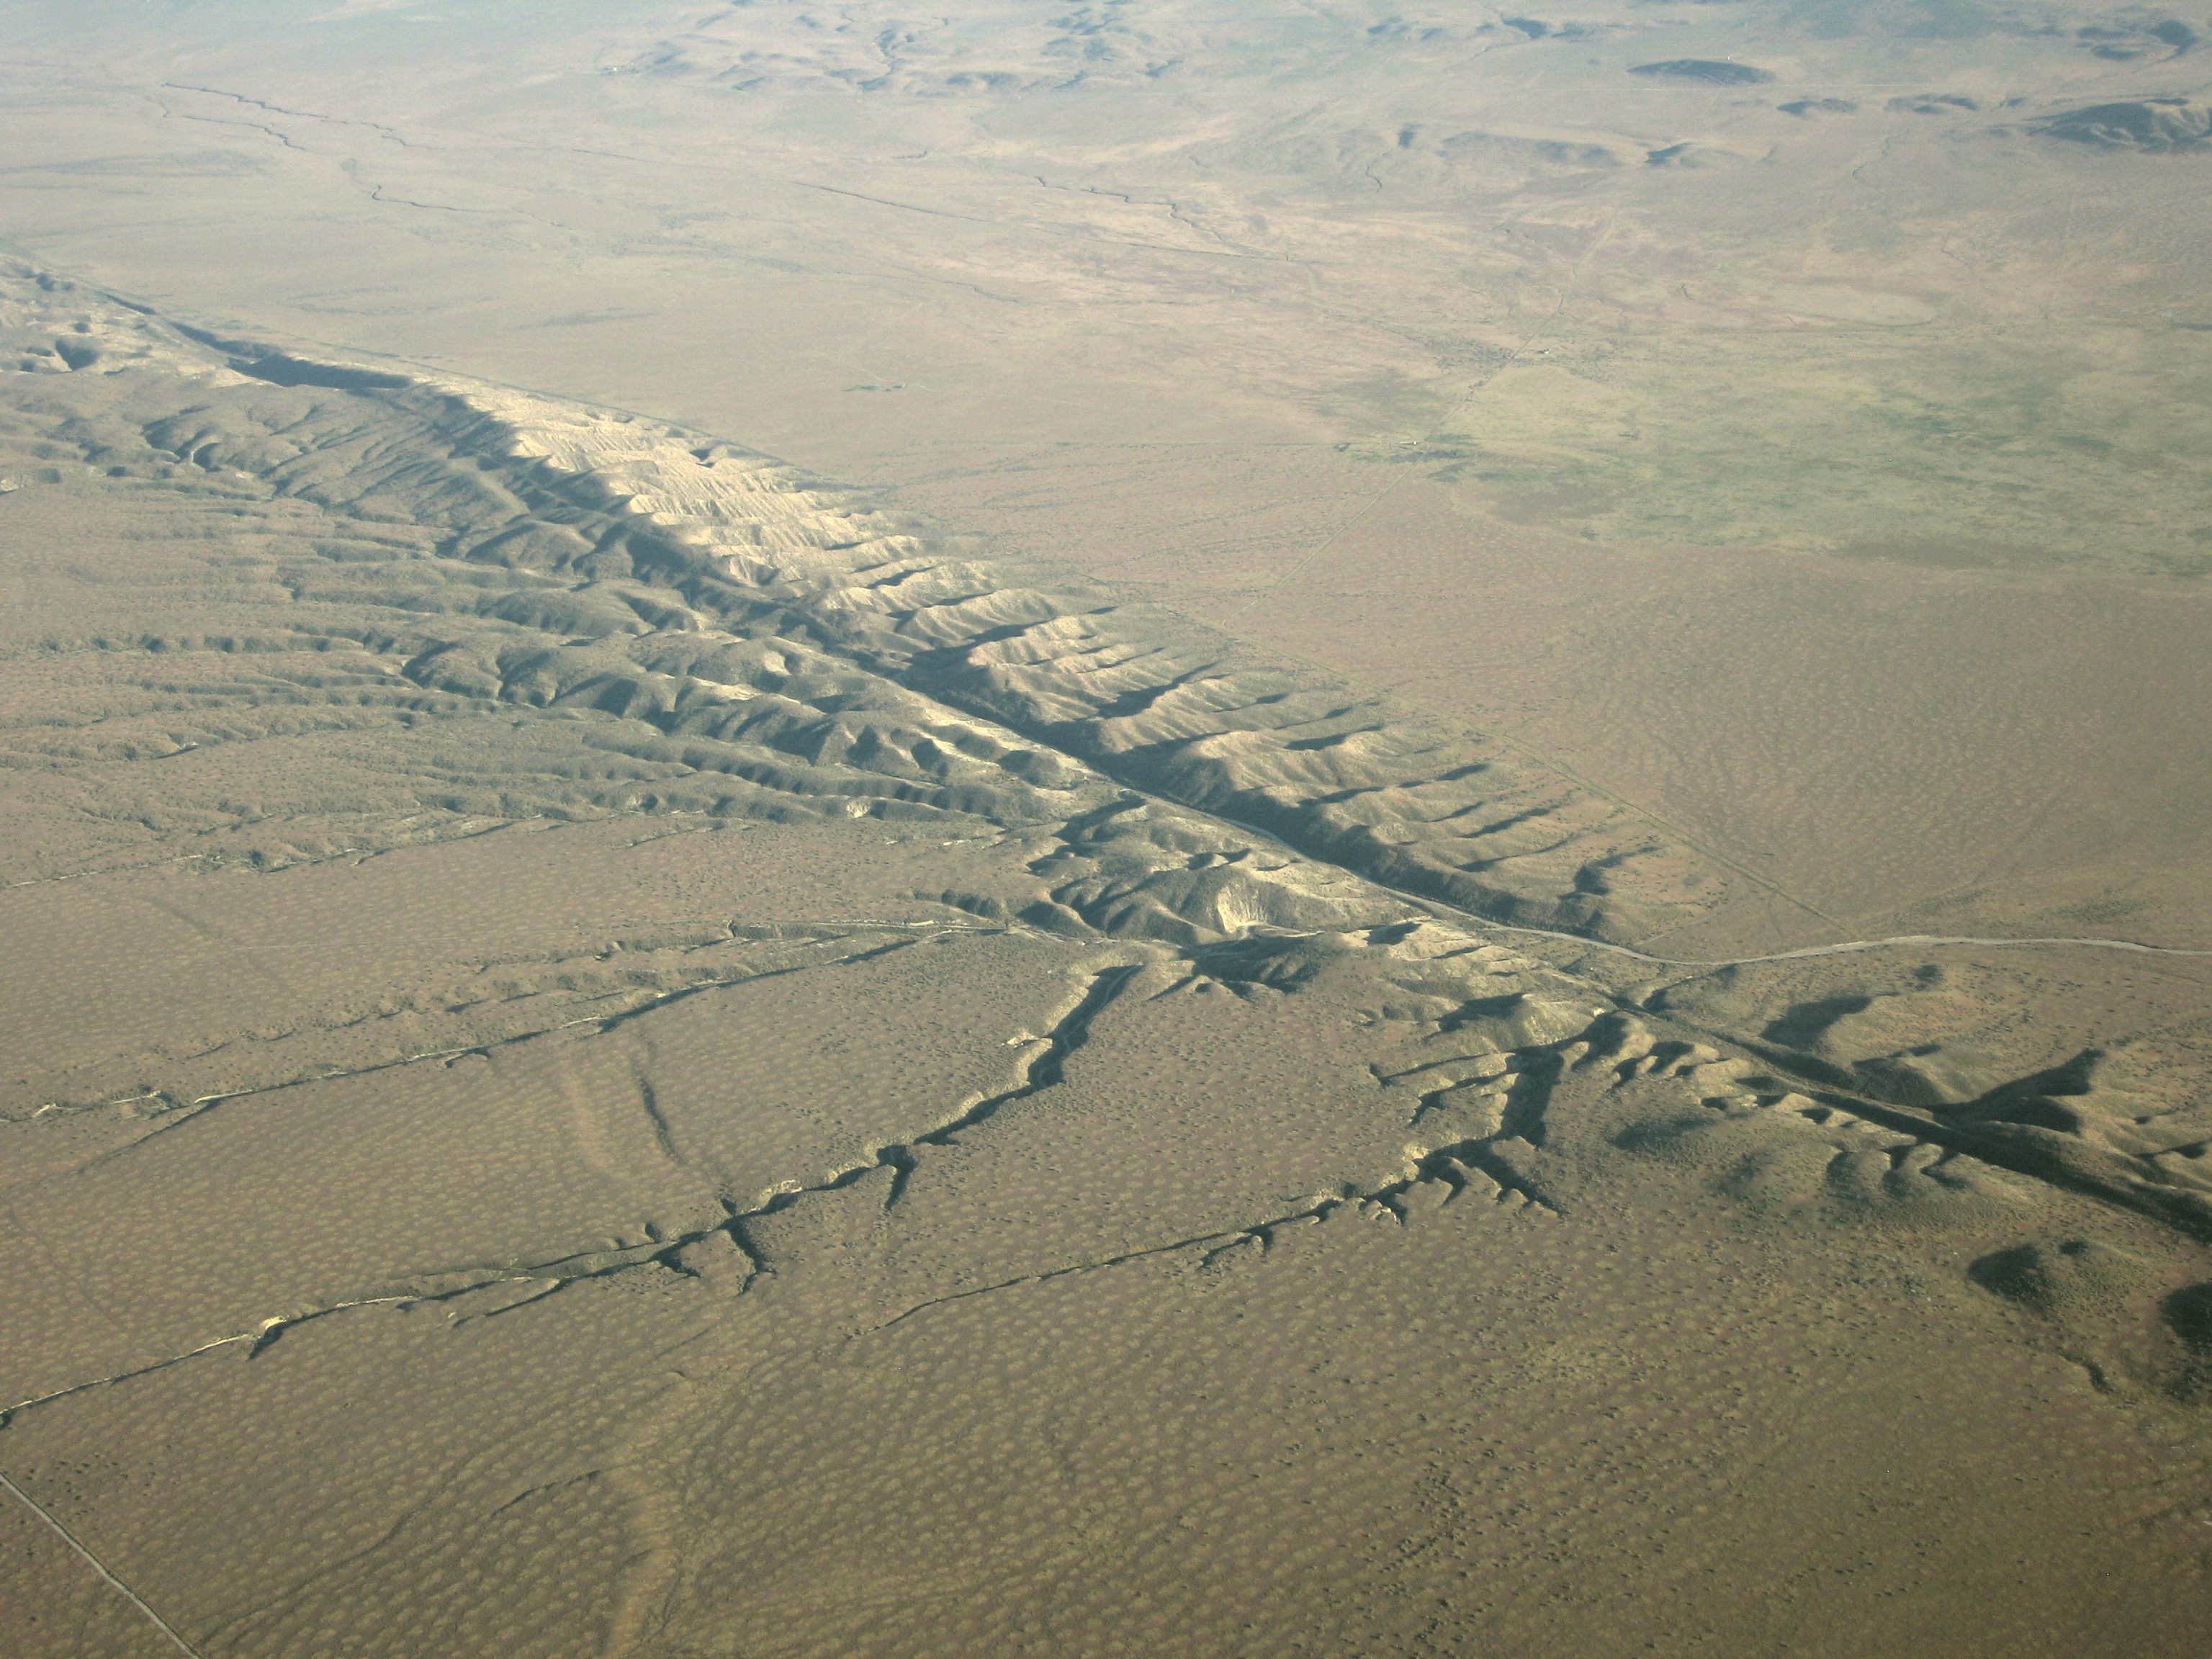 Scientists drill into San Andreas Fault to understand its secrets